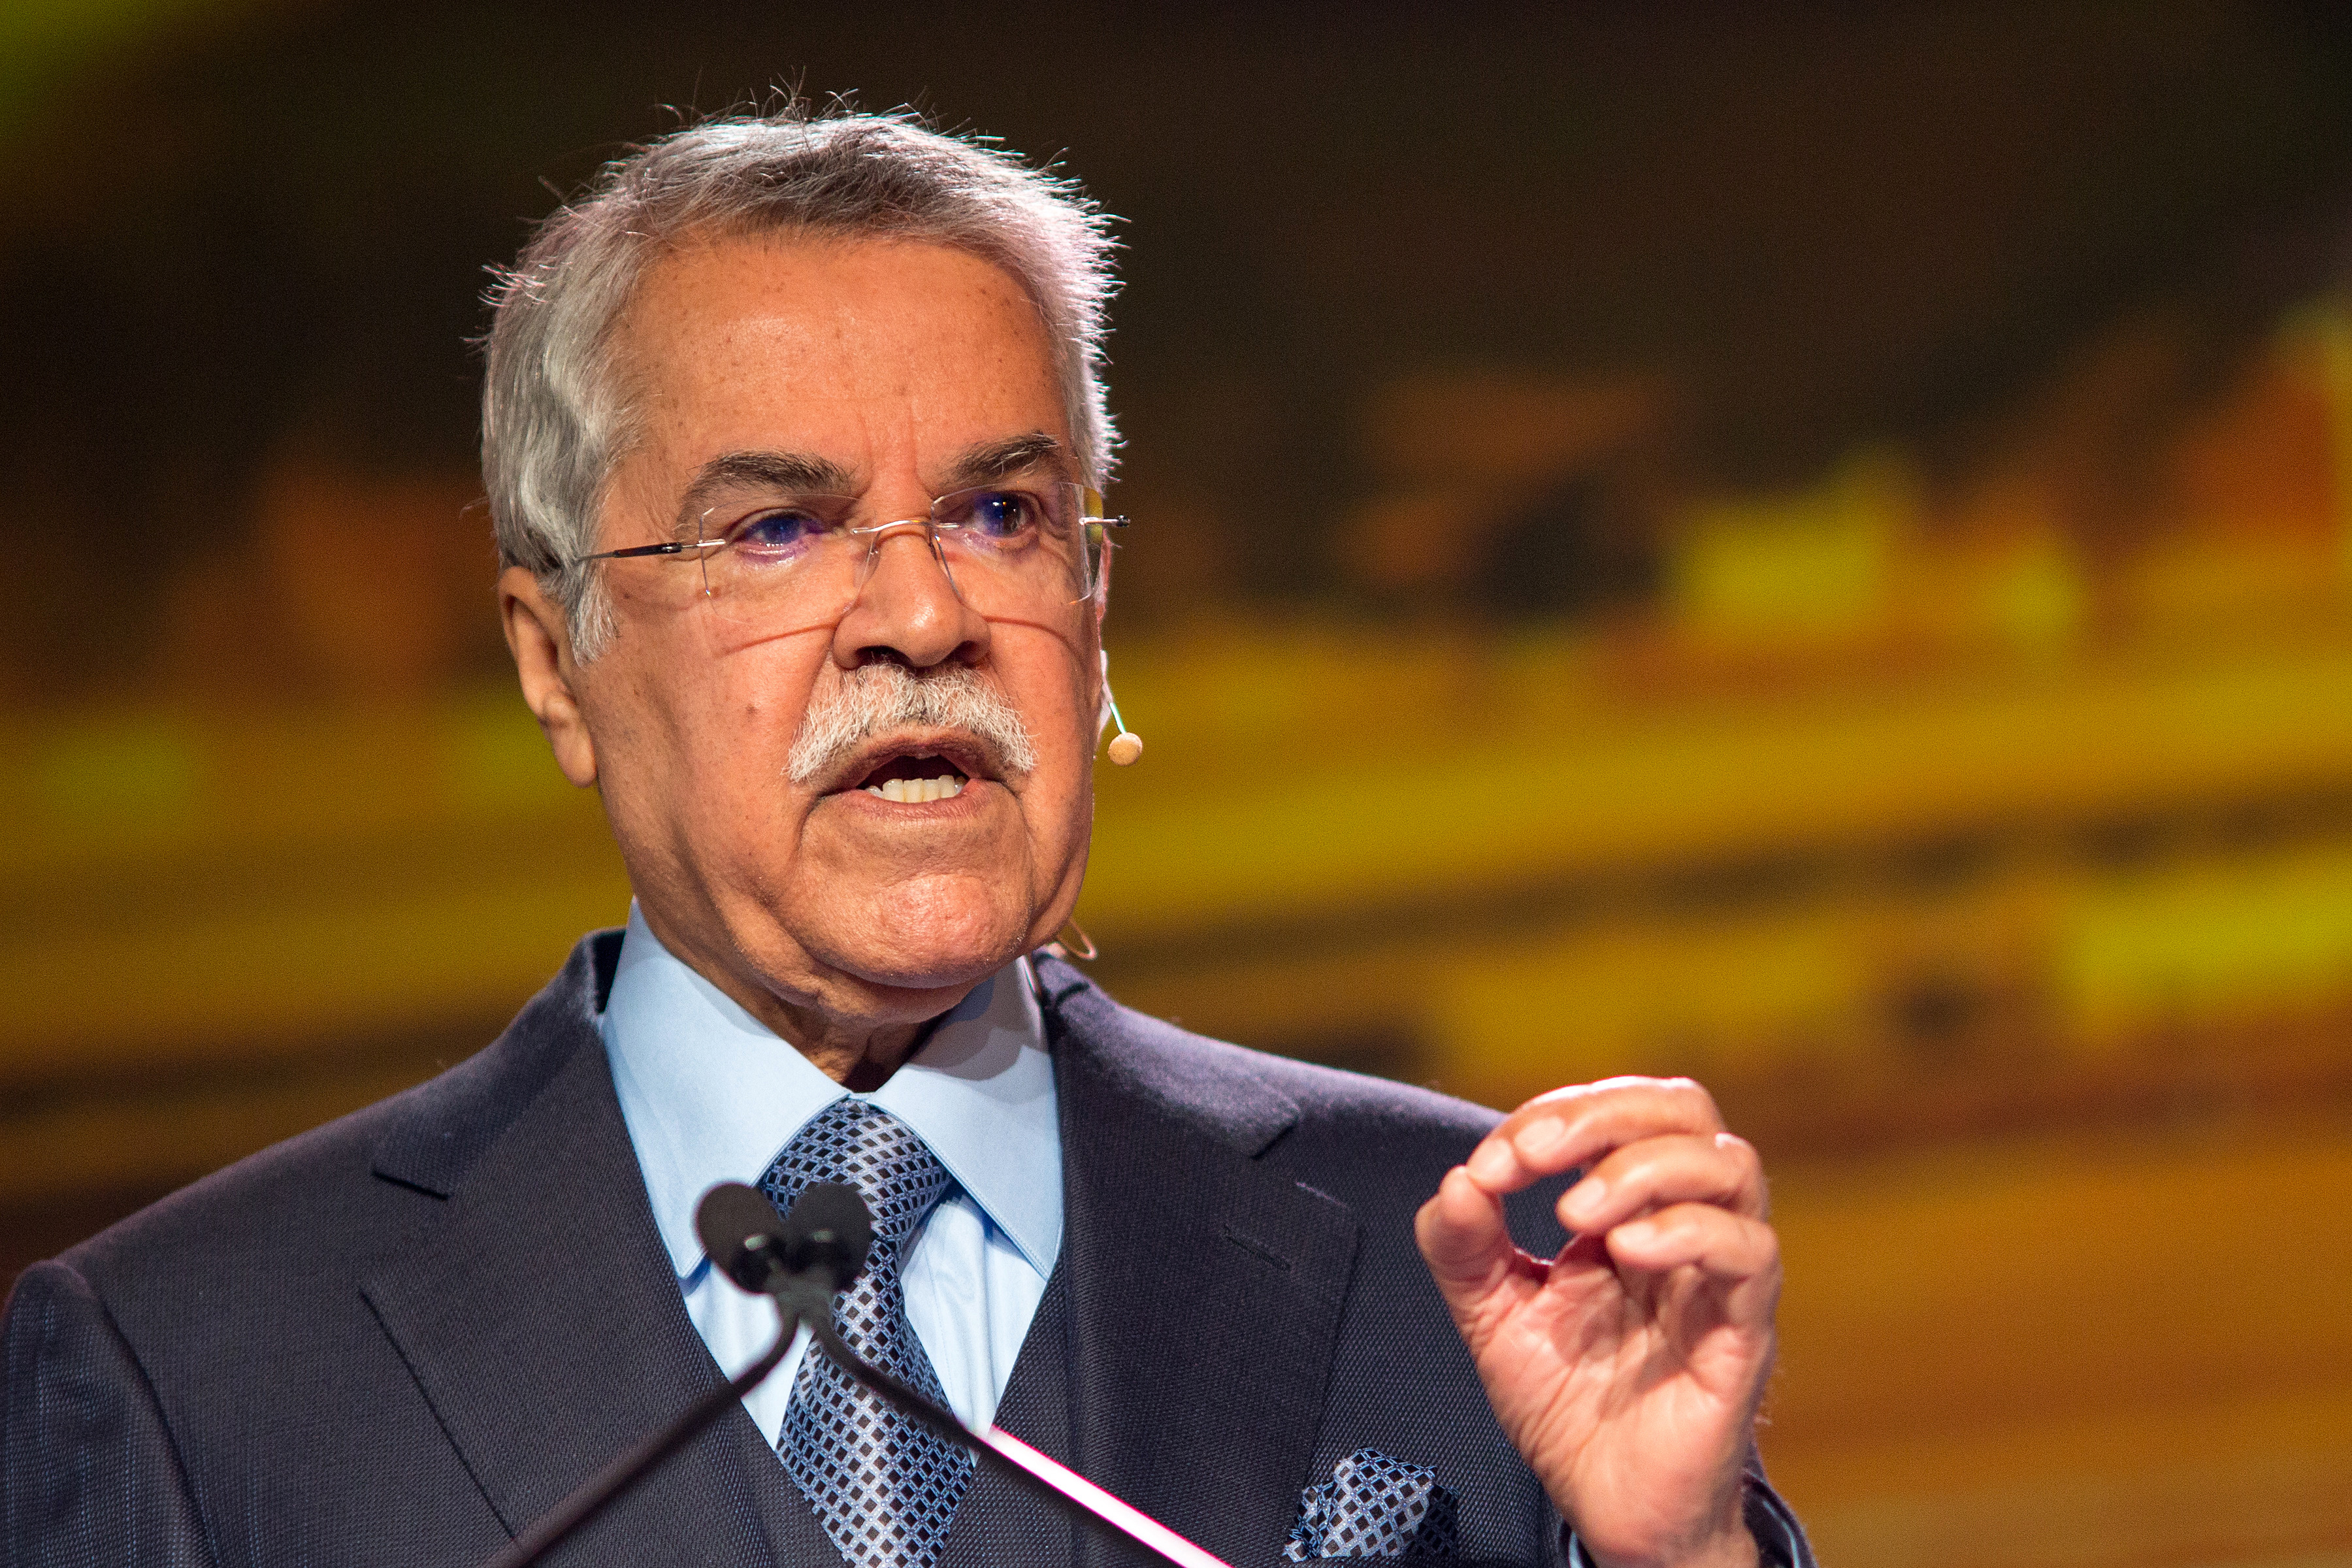 Ali Bin Ibrahim al-Naimi, Saudi Arabia's petroleum and mineral resources minister, speaks during the 2016 IHS CERAWeek conference in Houston on Feb. 23, 2016.